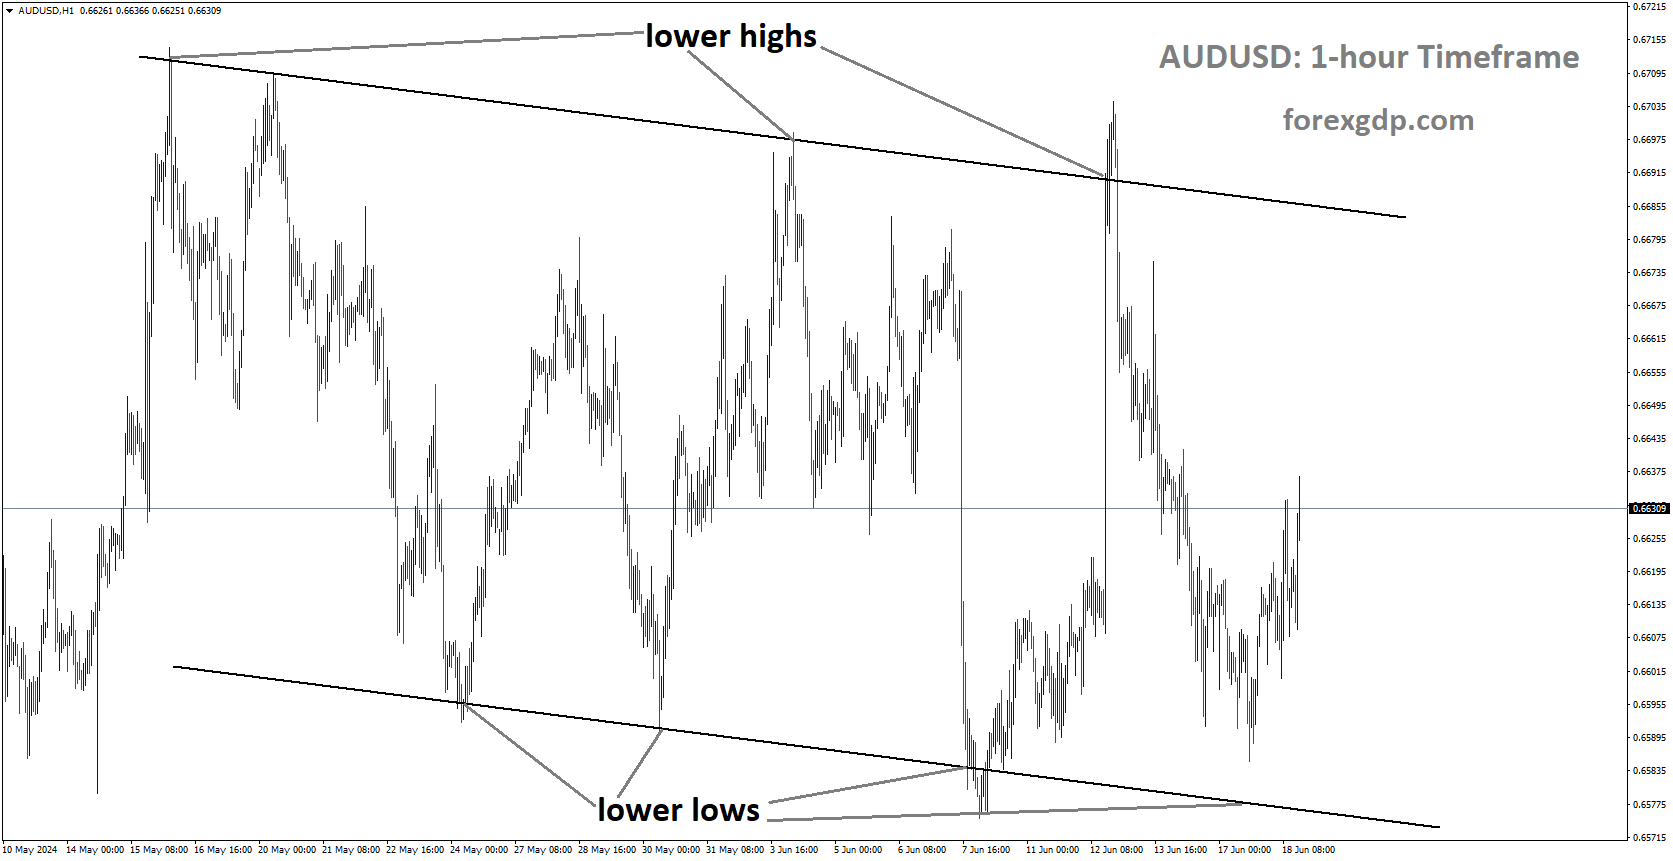 AUDUSD is moving in Descending channel and market has rebounded from the lower low area of the channel